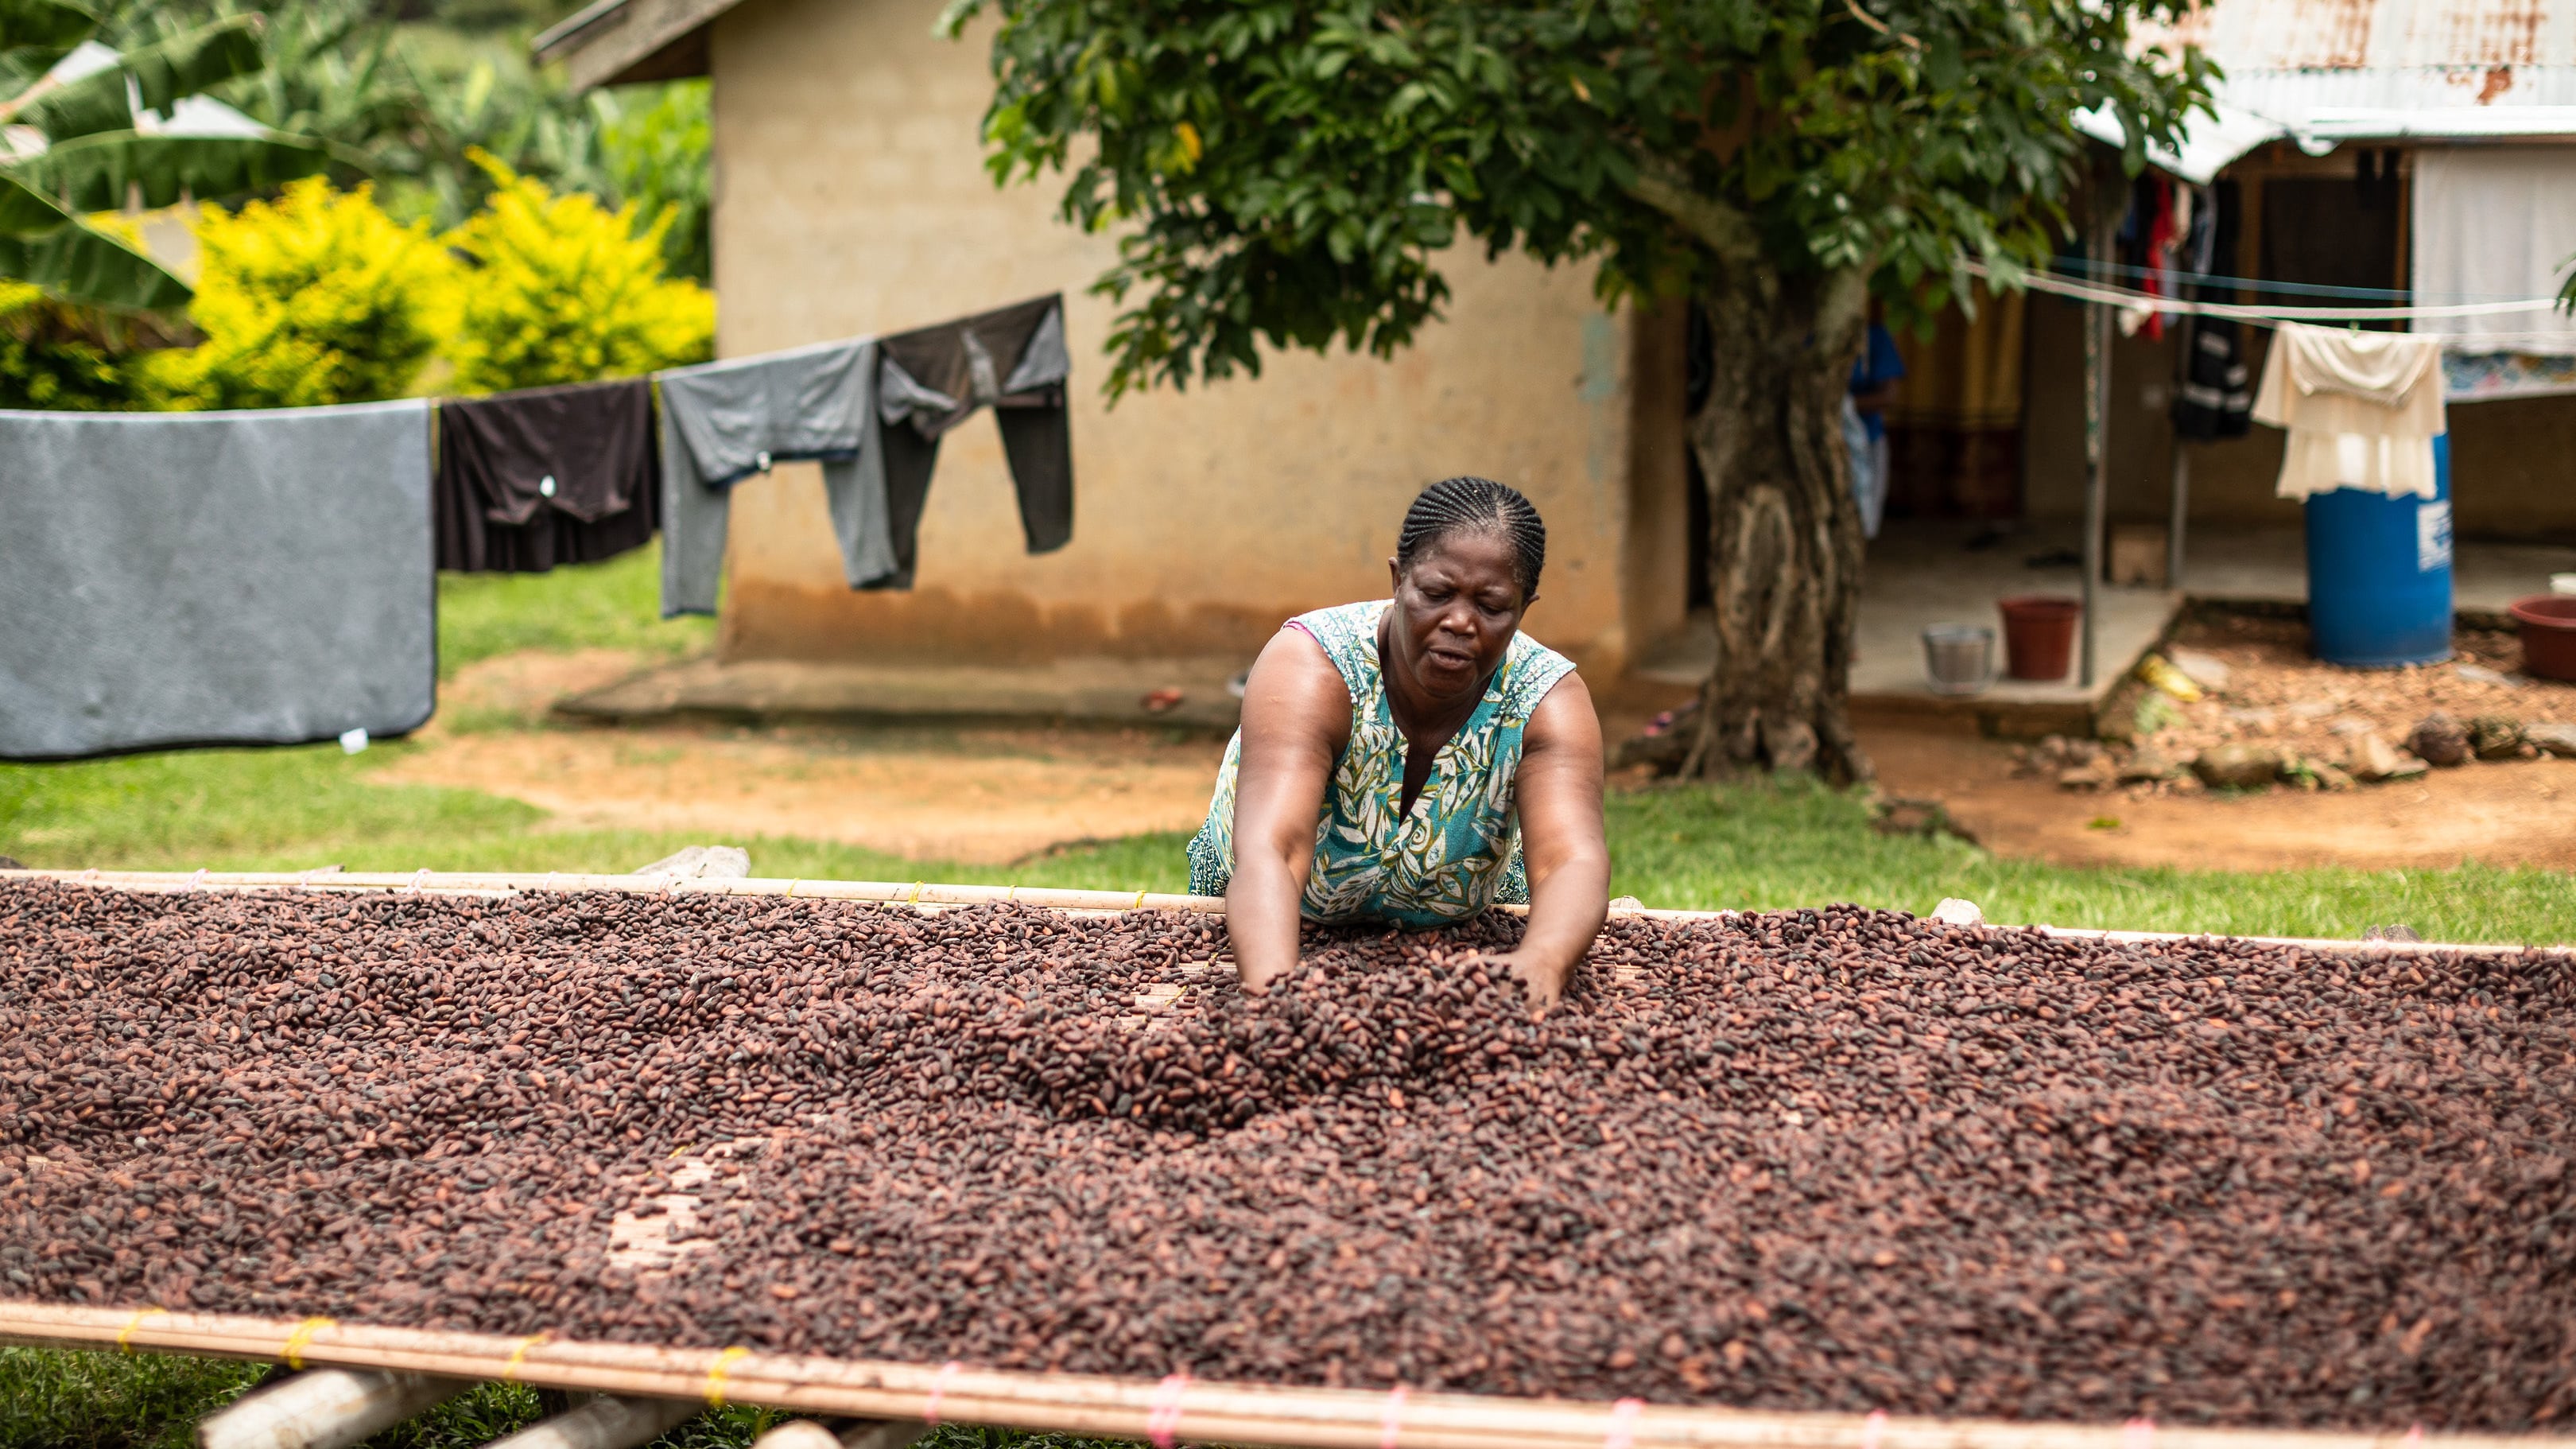 Climate change has affected cocoa bean growers